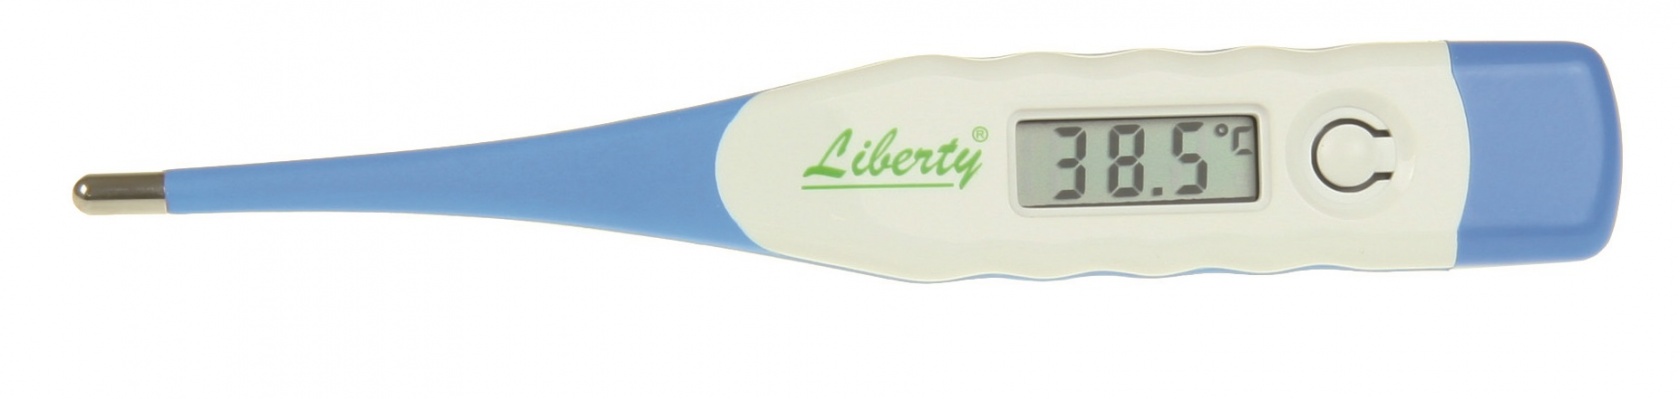 Thermometer Clinical Flexible Tip image 0